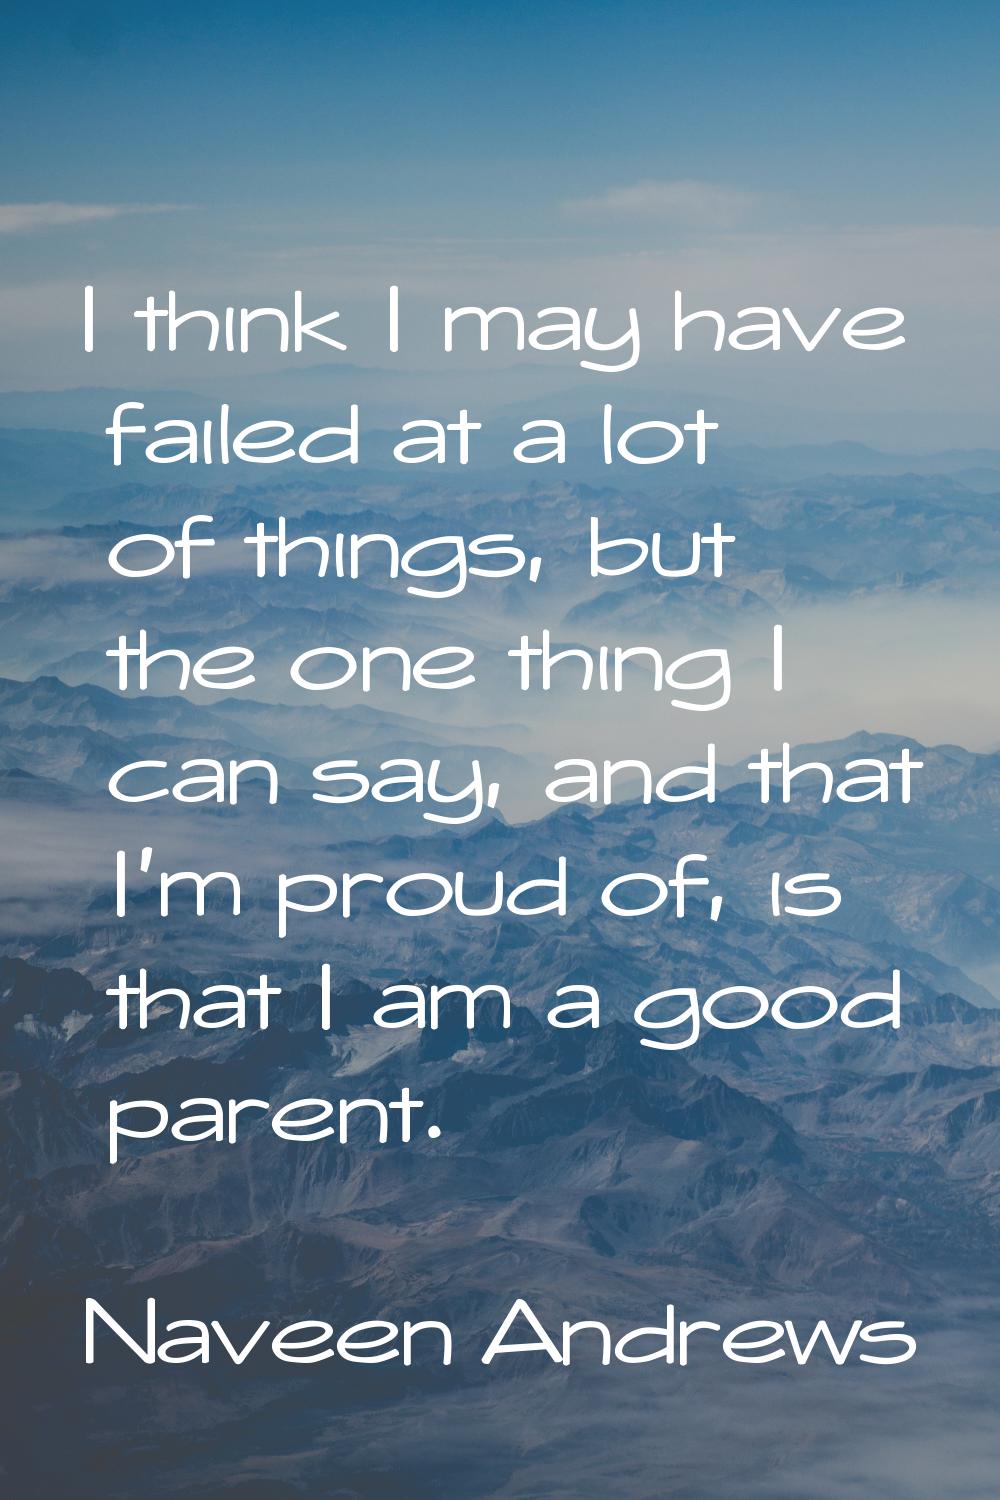 I think I may have failed at a lot of things, but the one thing I can say, and that I'm proud of, i